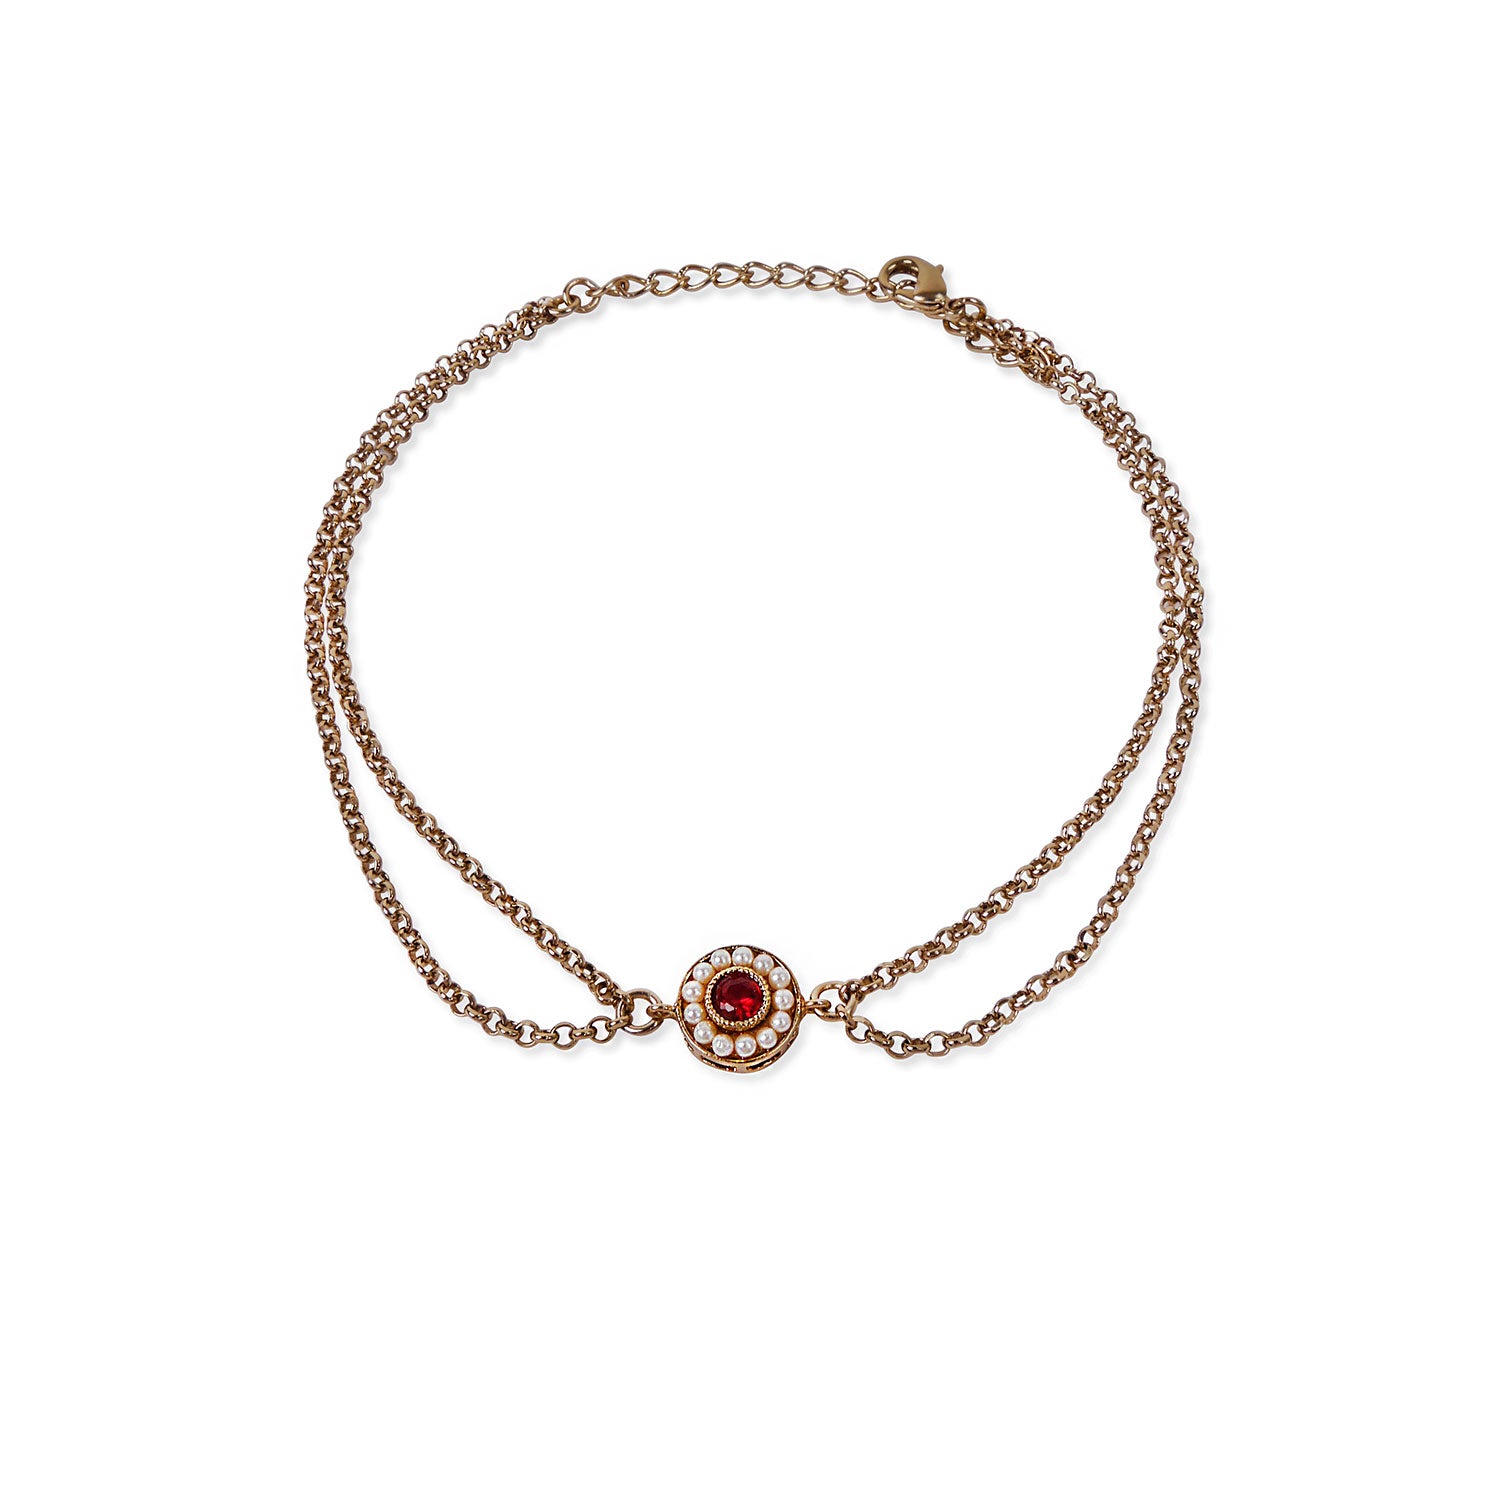 Leela Double Chain Anklet in Maroon